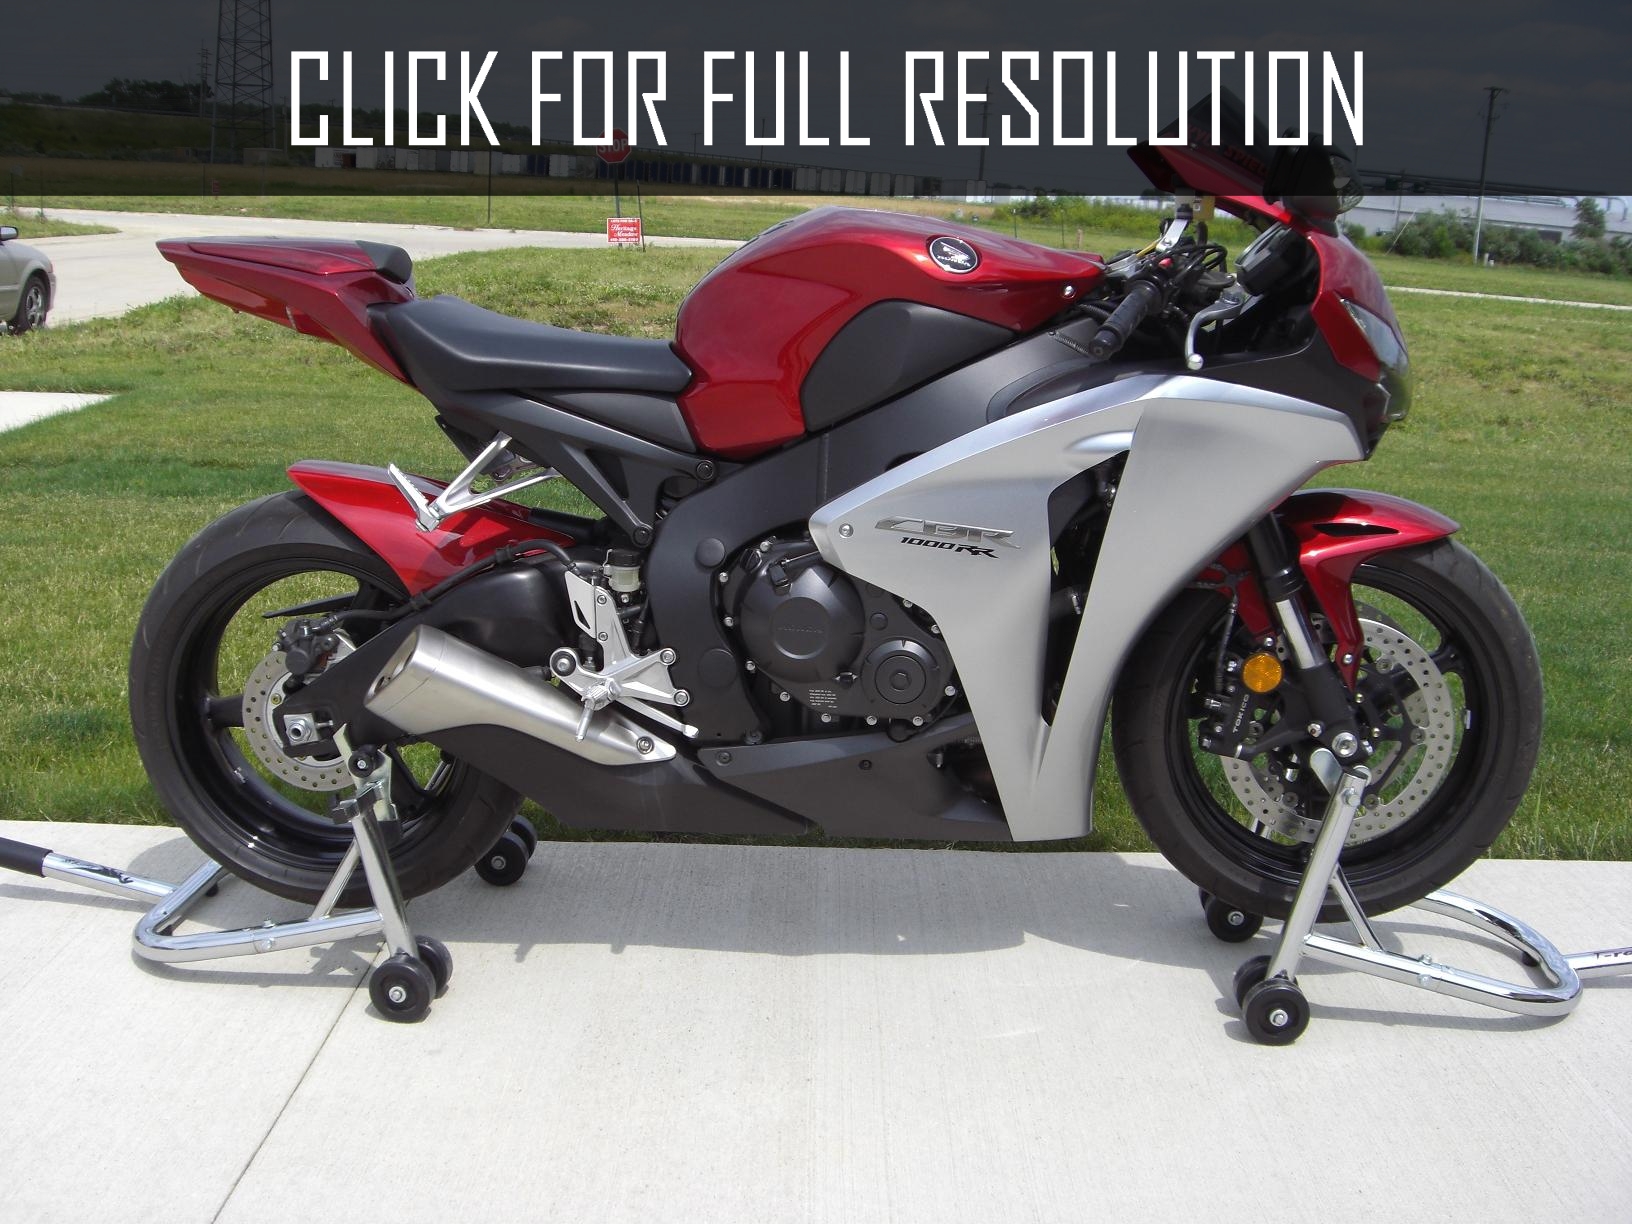 2008 Honda Cbr1000rr - news, reviews, msrp, ratings with amazing images